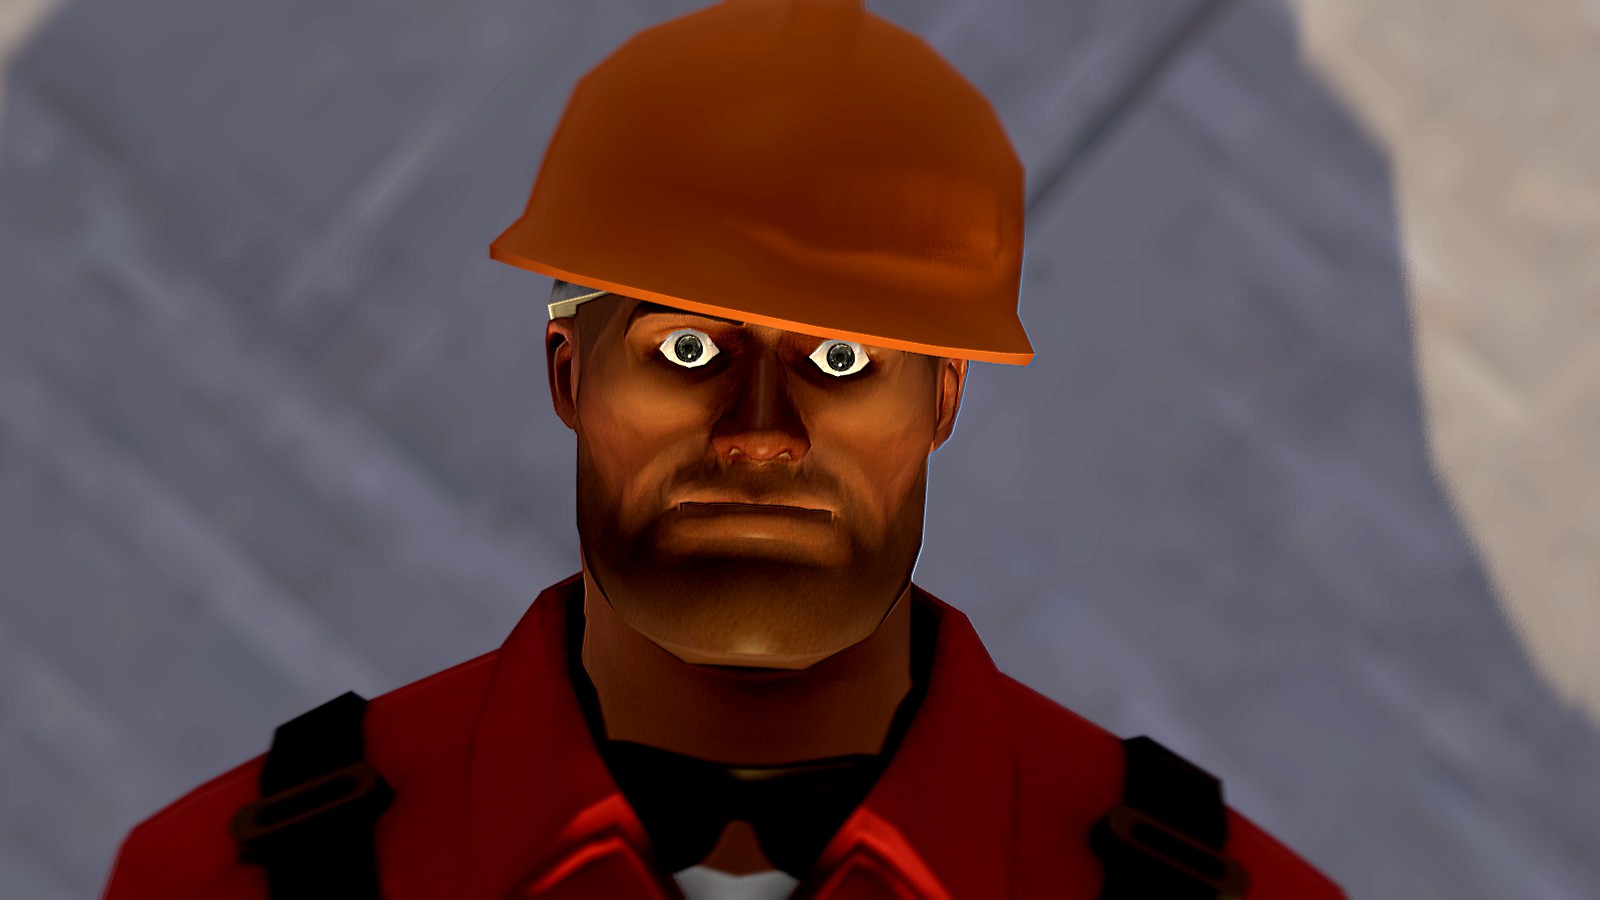 TF2 Engineer disapproves. 